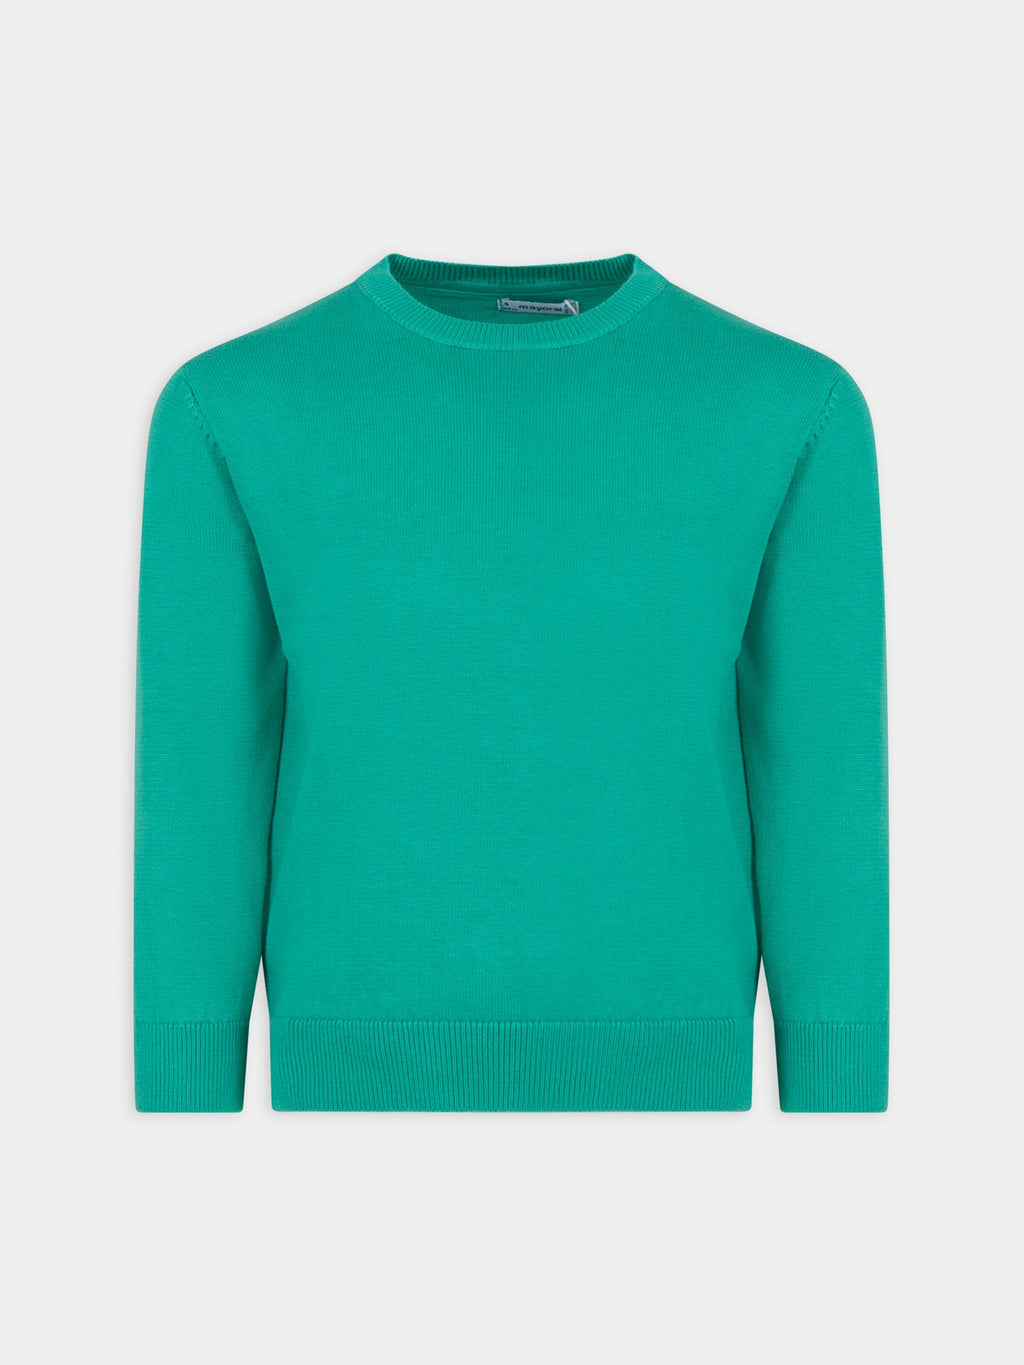 Green sweater for boy